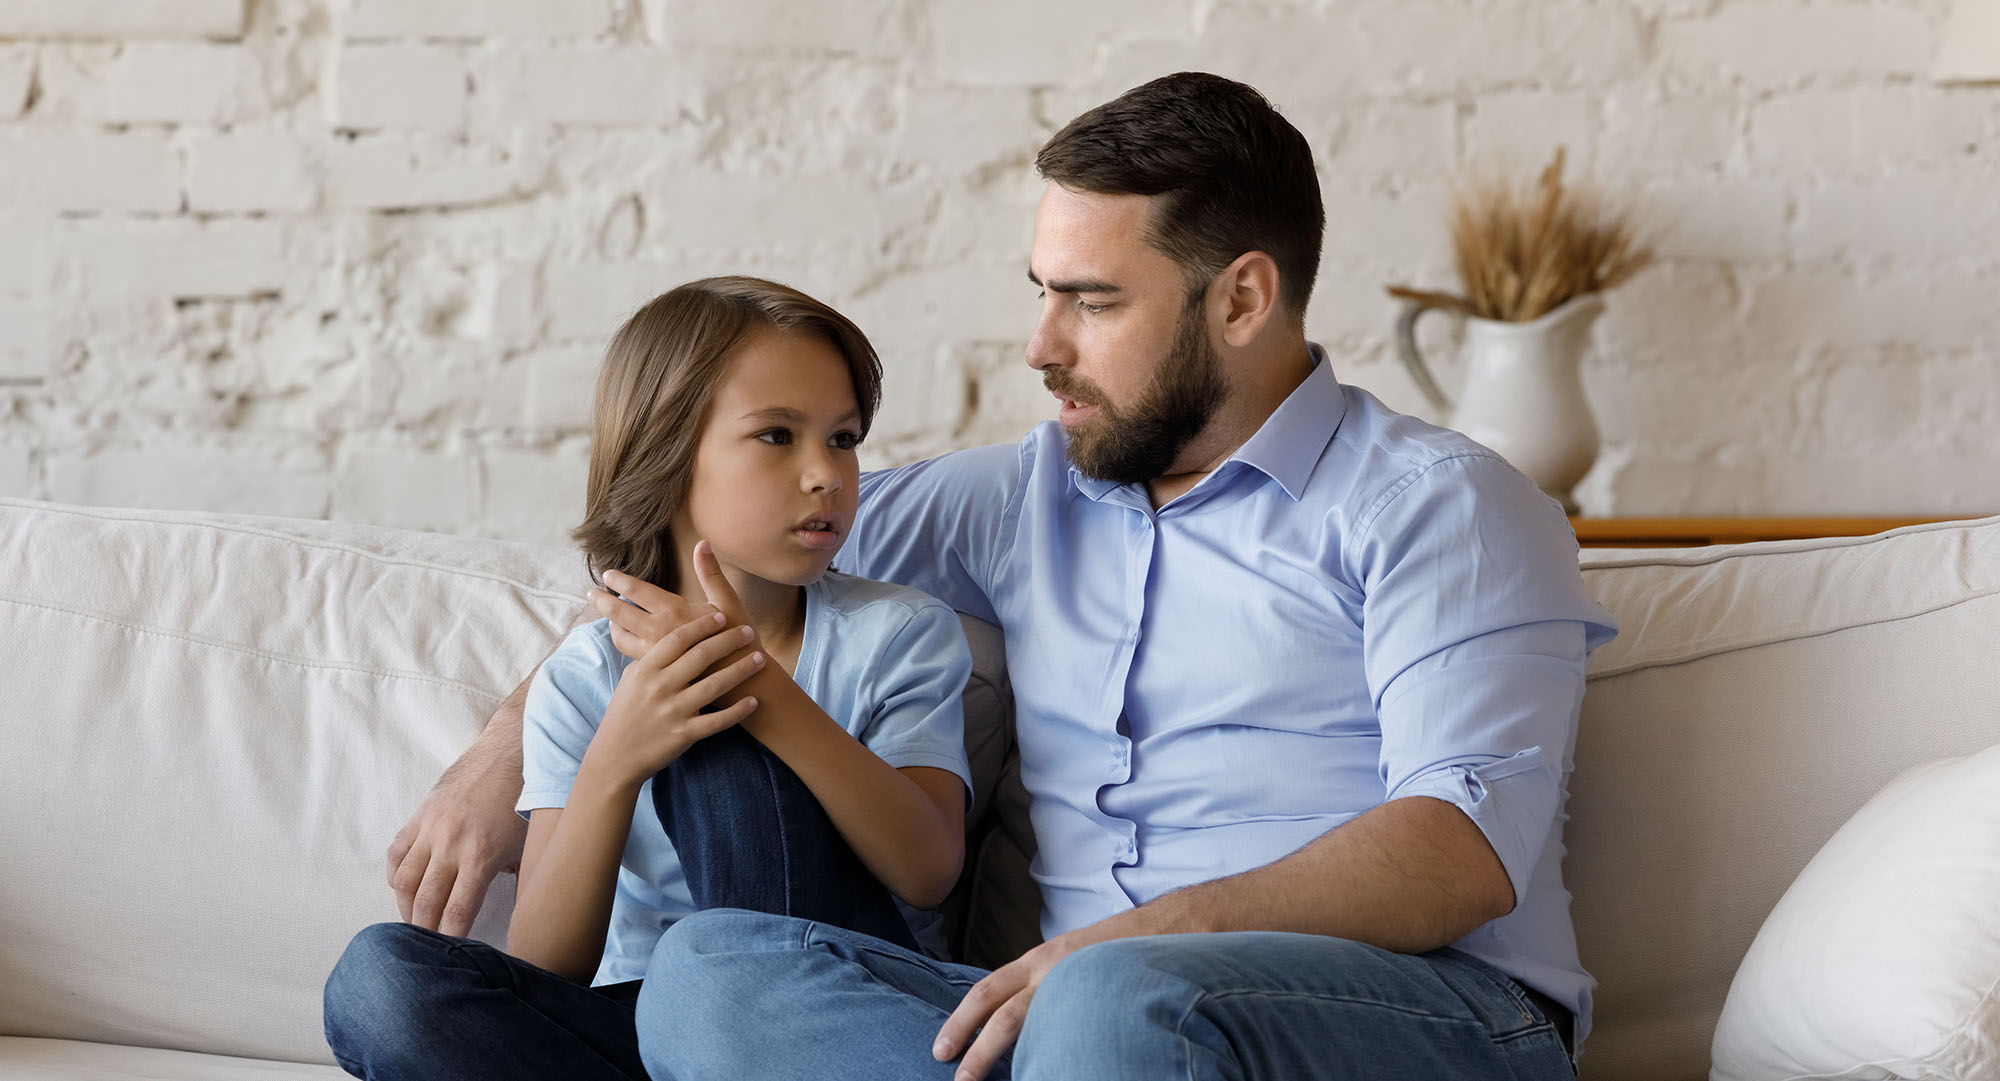 Parenting Therapy and Child Trauma Counseling in Arizona - Arizona Relationship Institute